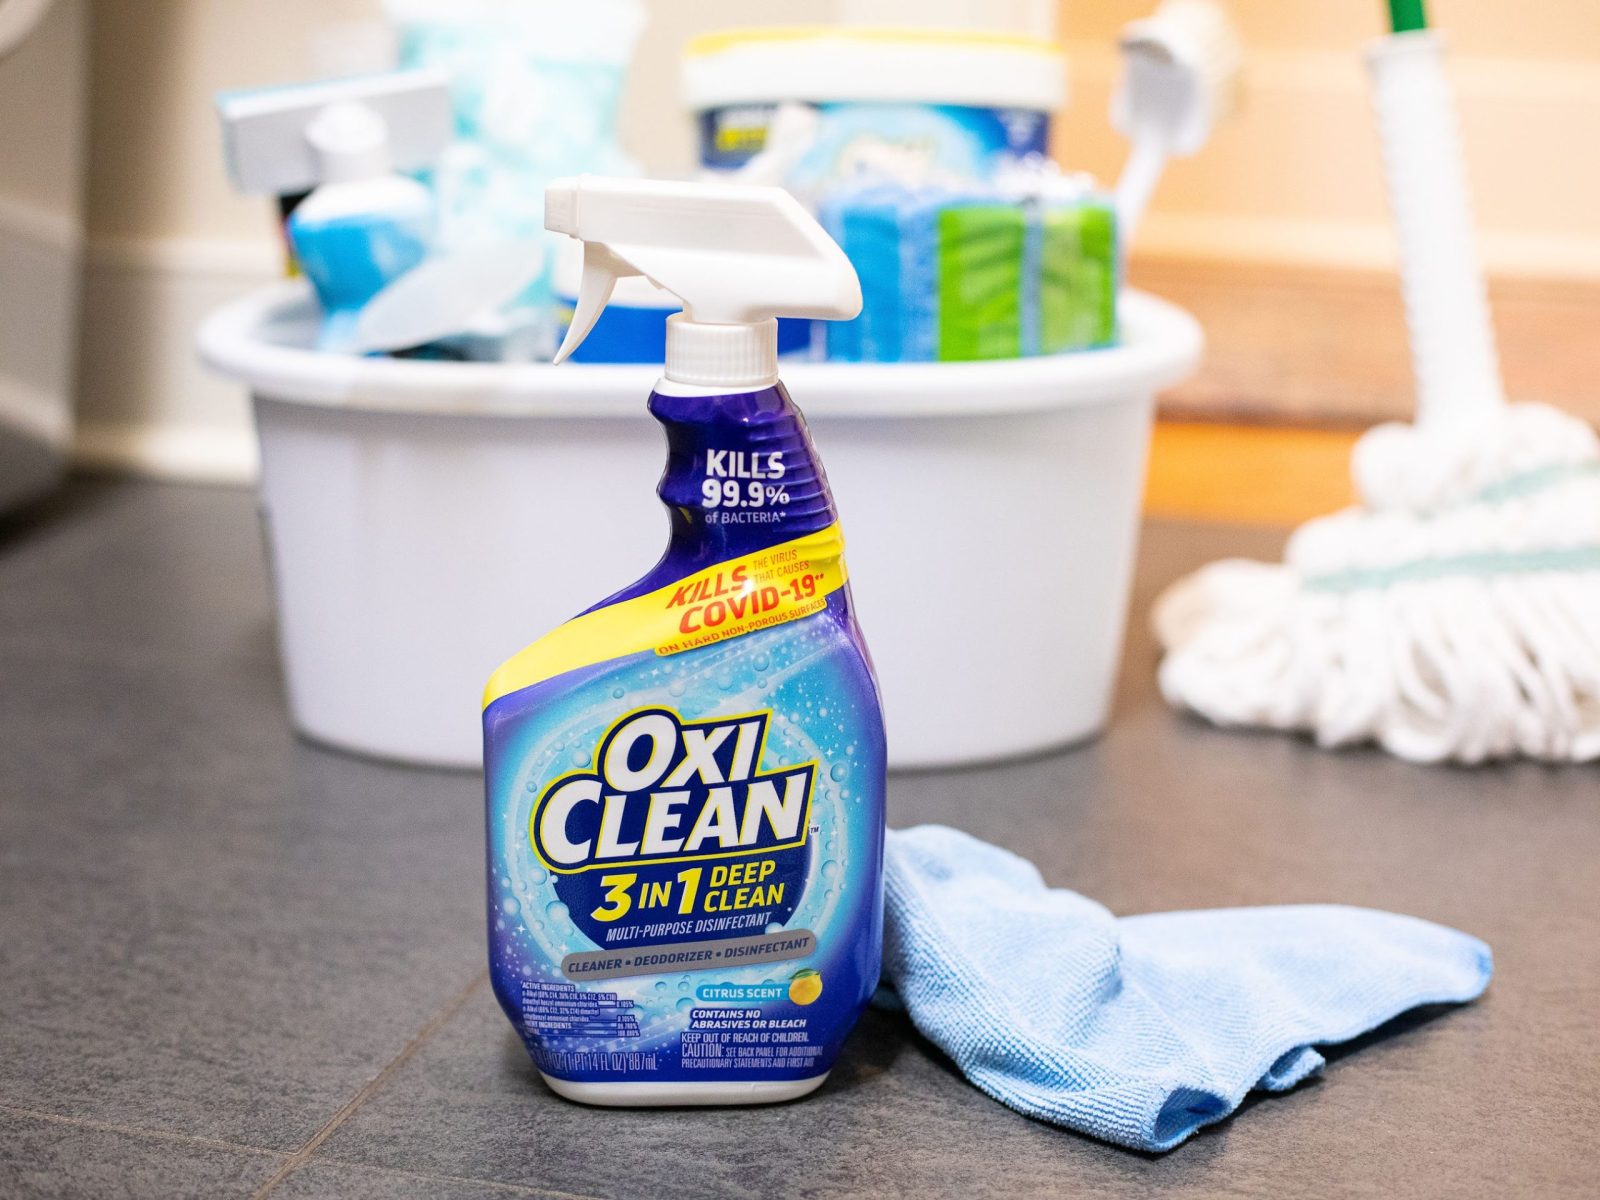 Grab Savings On OxiClean™ Multi-Purpose Disinfectant Cleaners At Publix – Clean & Disinfect Household Surfaces With The Power Of OxiClean™